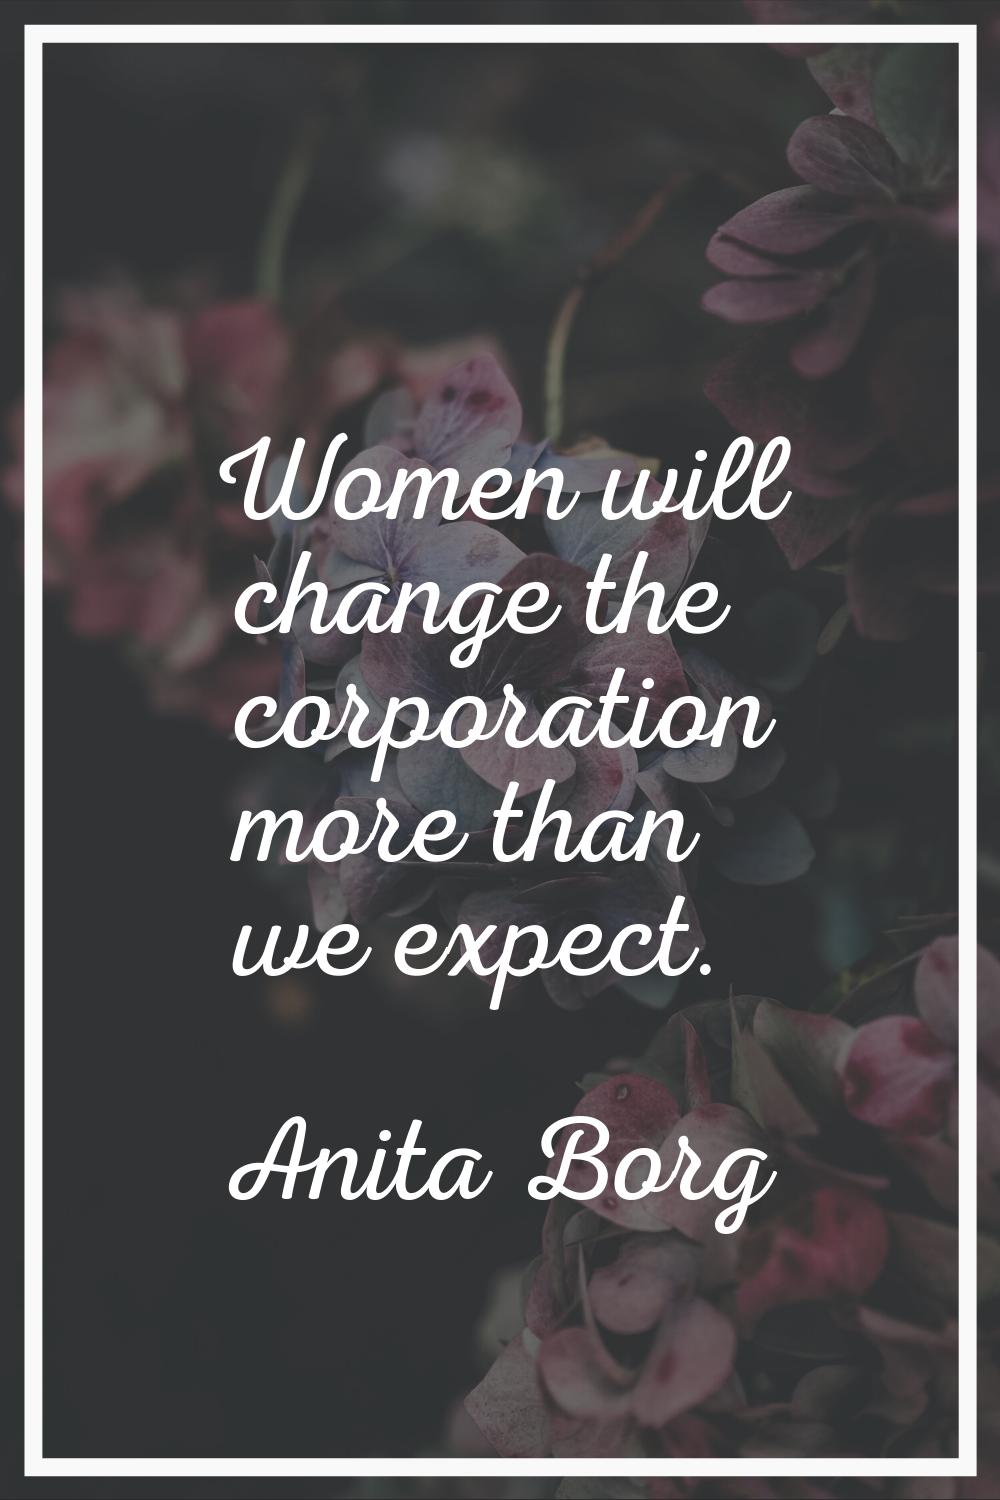 Women will change the corporation more than we expect.